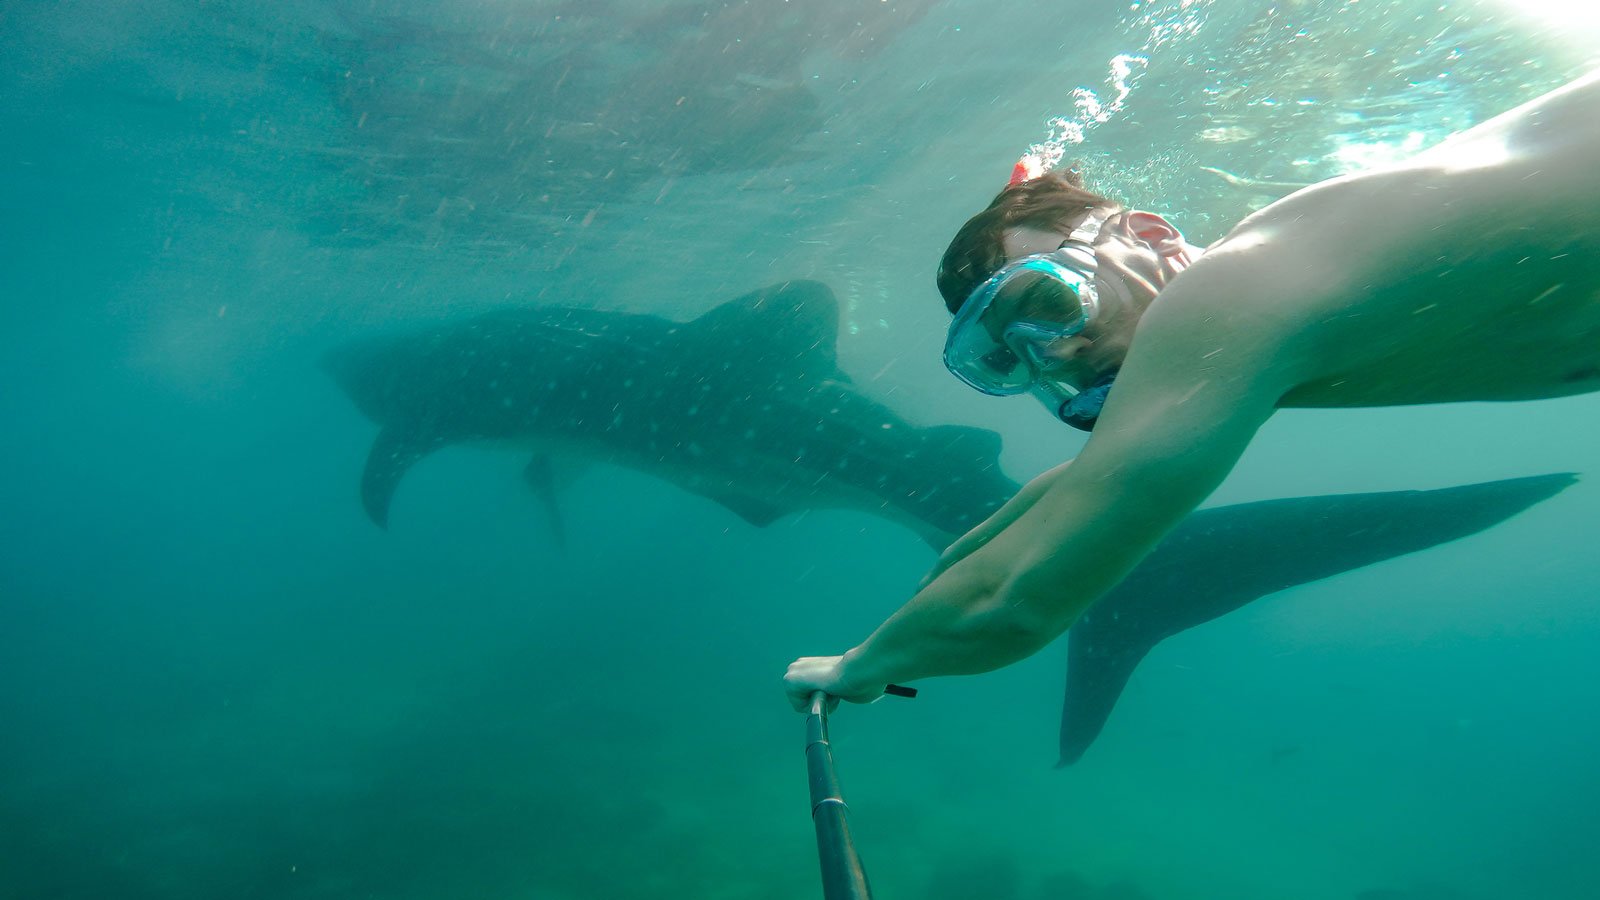 <p>You may be familiar with “Shark Week” on the Discovery Channel, but how about swimming with whale sharks off the coast of Mexico?</p><p>Although a whale shark is technically a fish, they’re still impressive animals that weigh around 20,000 pounds and have more than 350 rows of teeth. You can dive into the Caribbean Sea and snorkel or swim alongside the largest fish in the ocean by joining one of many tours throughout the Cancun area. </p><p>Several whale shark tours provide transportation and meals for your day trip out on the water. You might also see other marine life like dolphins and turtles who frequent the area and add to the excitement of exploring the Yucatan coast.</p><p>You may never get the chance to swim with whale sharks again, so you might as well go for it. </p>